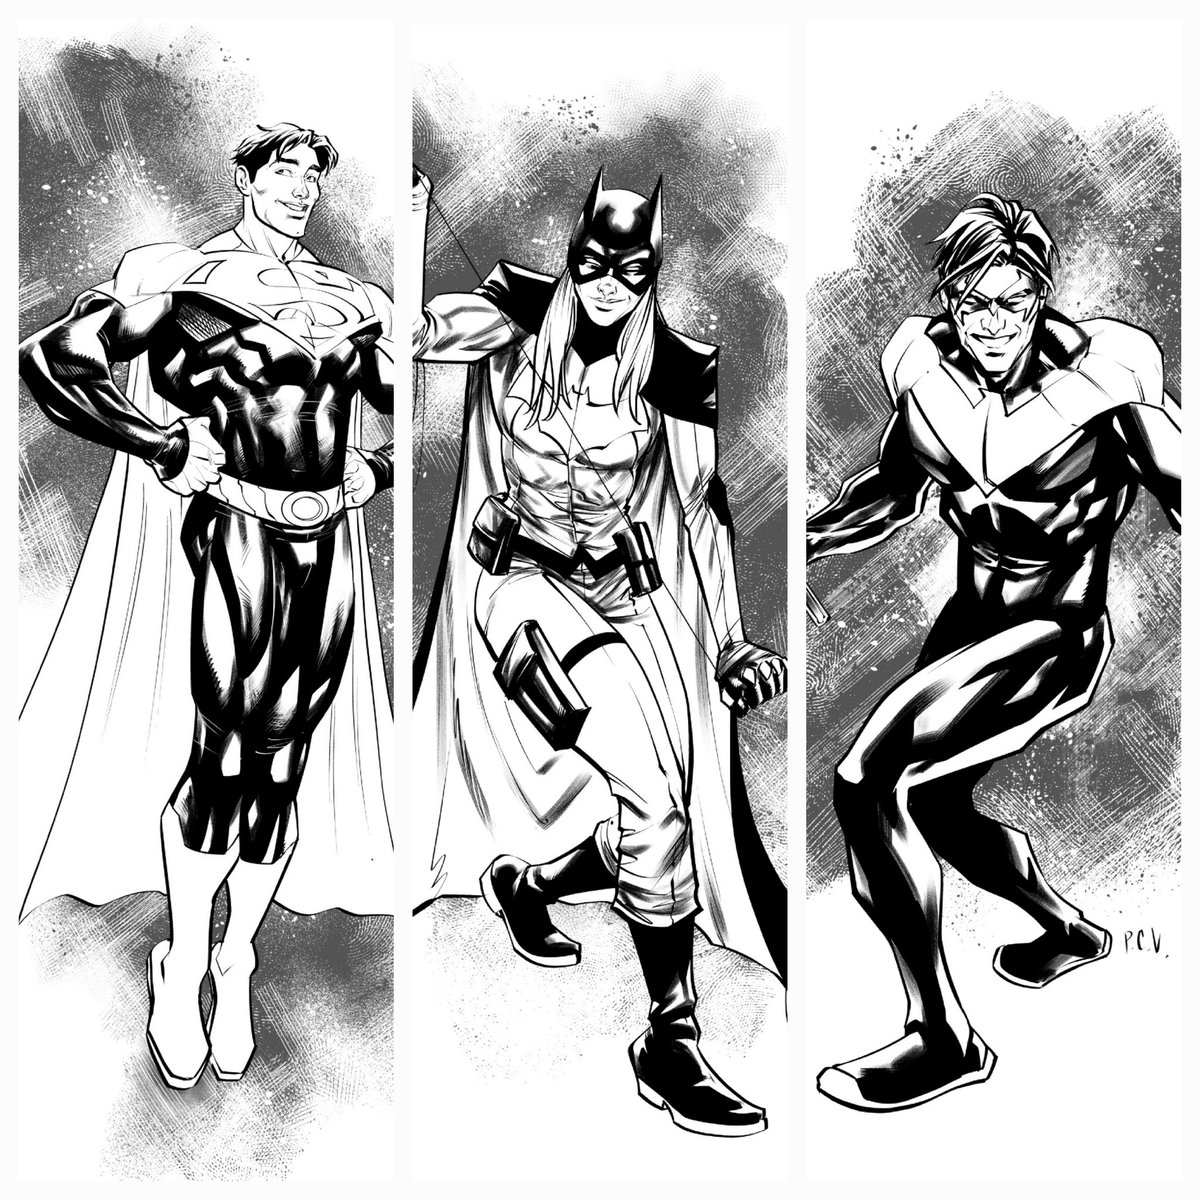 Got a chance to have some fun with these awesome pieces by @phillipsevy! 😃👍🎨 

Always loved this design by @Bruno_Redondo_F and @TomTaylorMade series! 🦇🦇

#dccomics #superman #batgirl #nightwing #batman